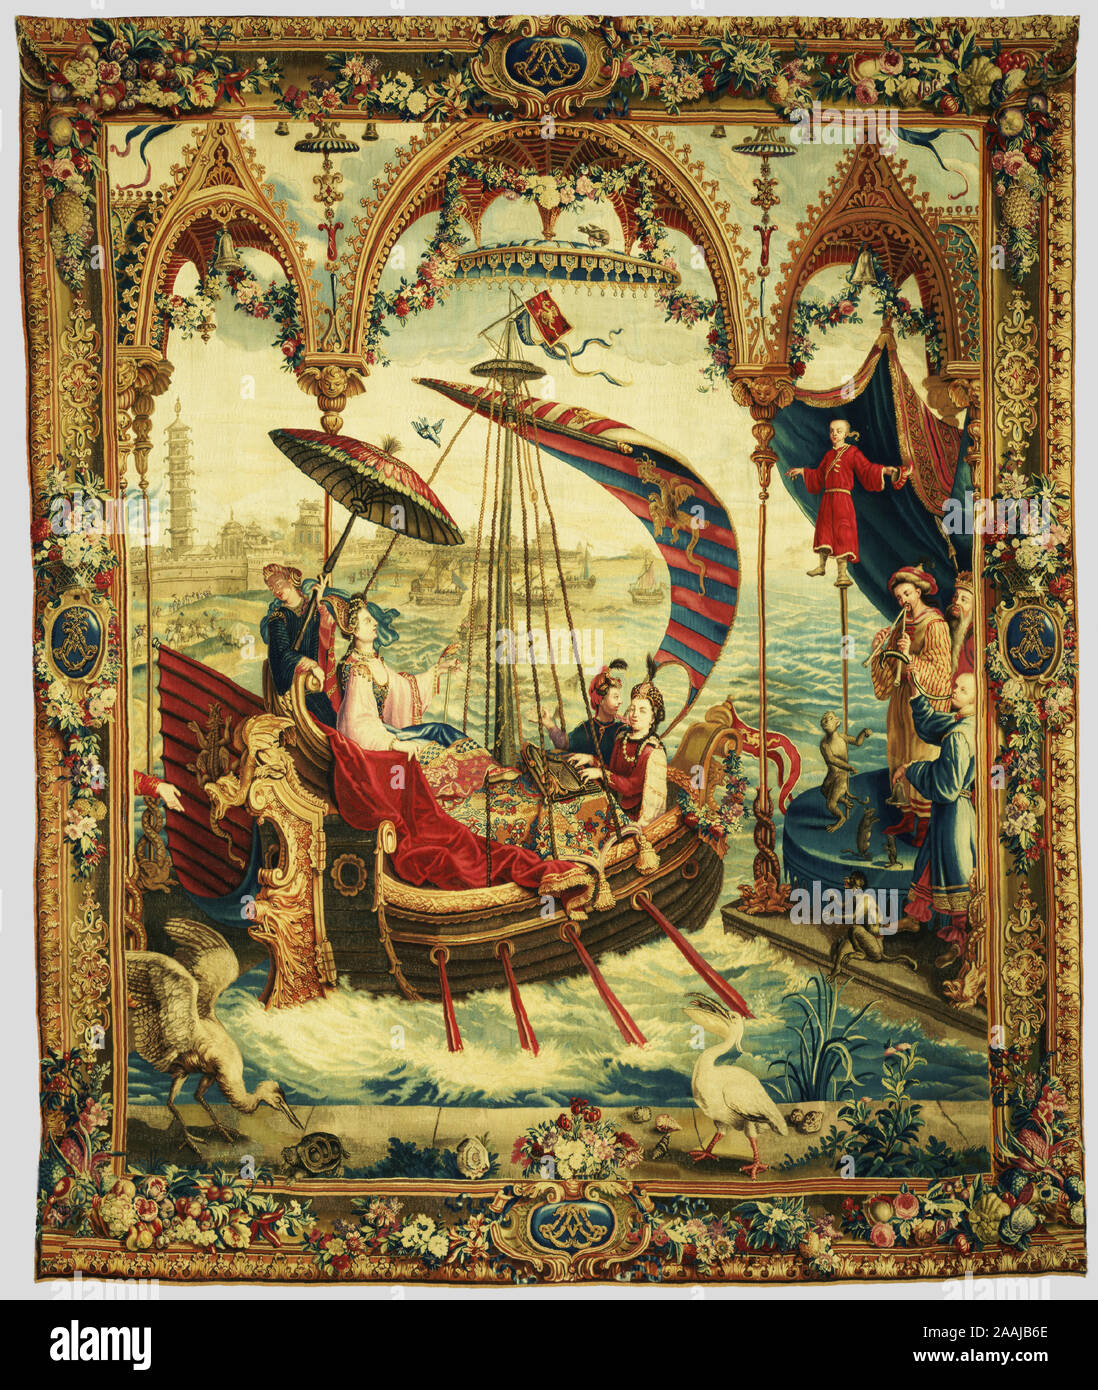 Tapestry: The Empress Sailing from The Story of the Emperor of China Series; After designs by Guy-Louis Vernansal (French, 1648 - 1729), and Jean-Baptiste Monnoyer (French, 1636 - 1699), and Jean-Baptiste Belin de Fontenay (French, 1653 - 1715), Woven at the Beauvais Manufactory (French, founded 1664), under the direction of Philippe Béhagle (French, 1641 - 1705); design about 1690; weave about 1697 - 1705; Wool and silk; 367.6 x 310.5 cm (144 3/4 x 122 1/4 in.) Stock Photo